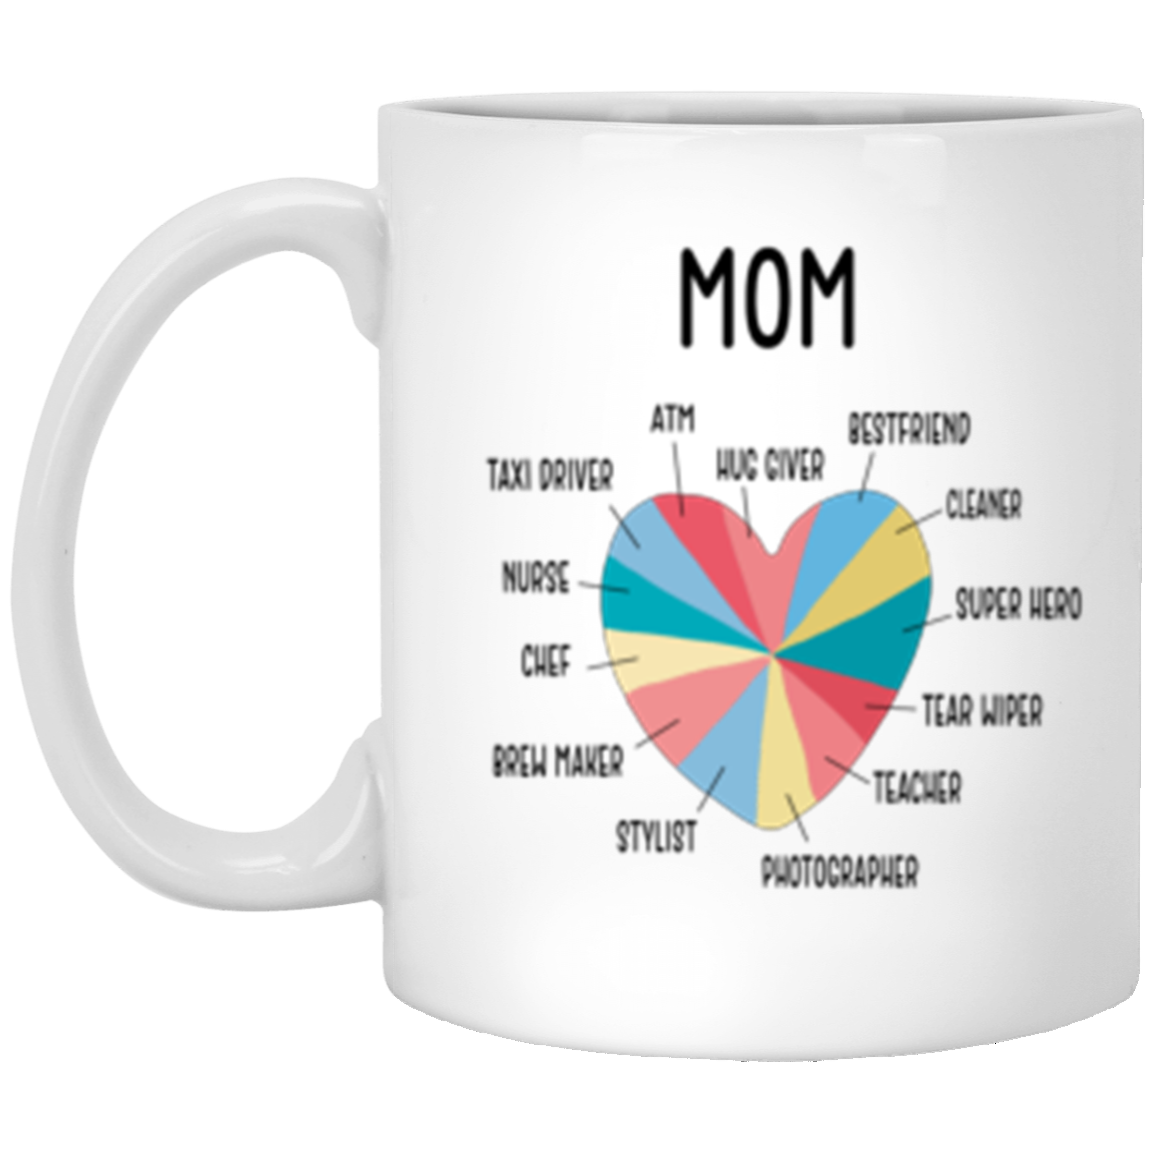 Best Mom Ever Mug Funny Mothers Day Coffee Cup - 11oz